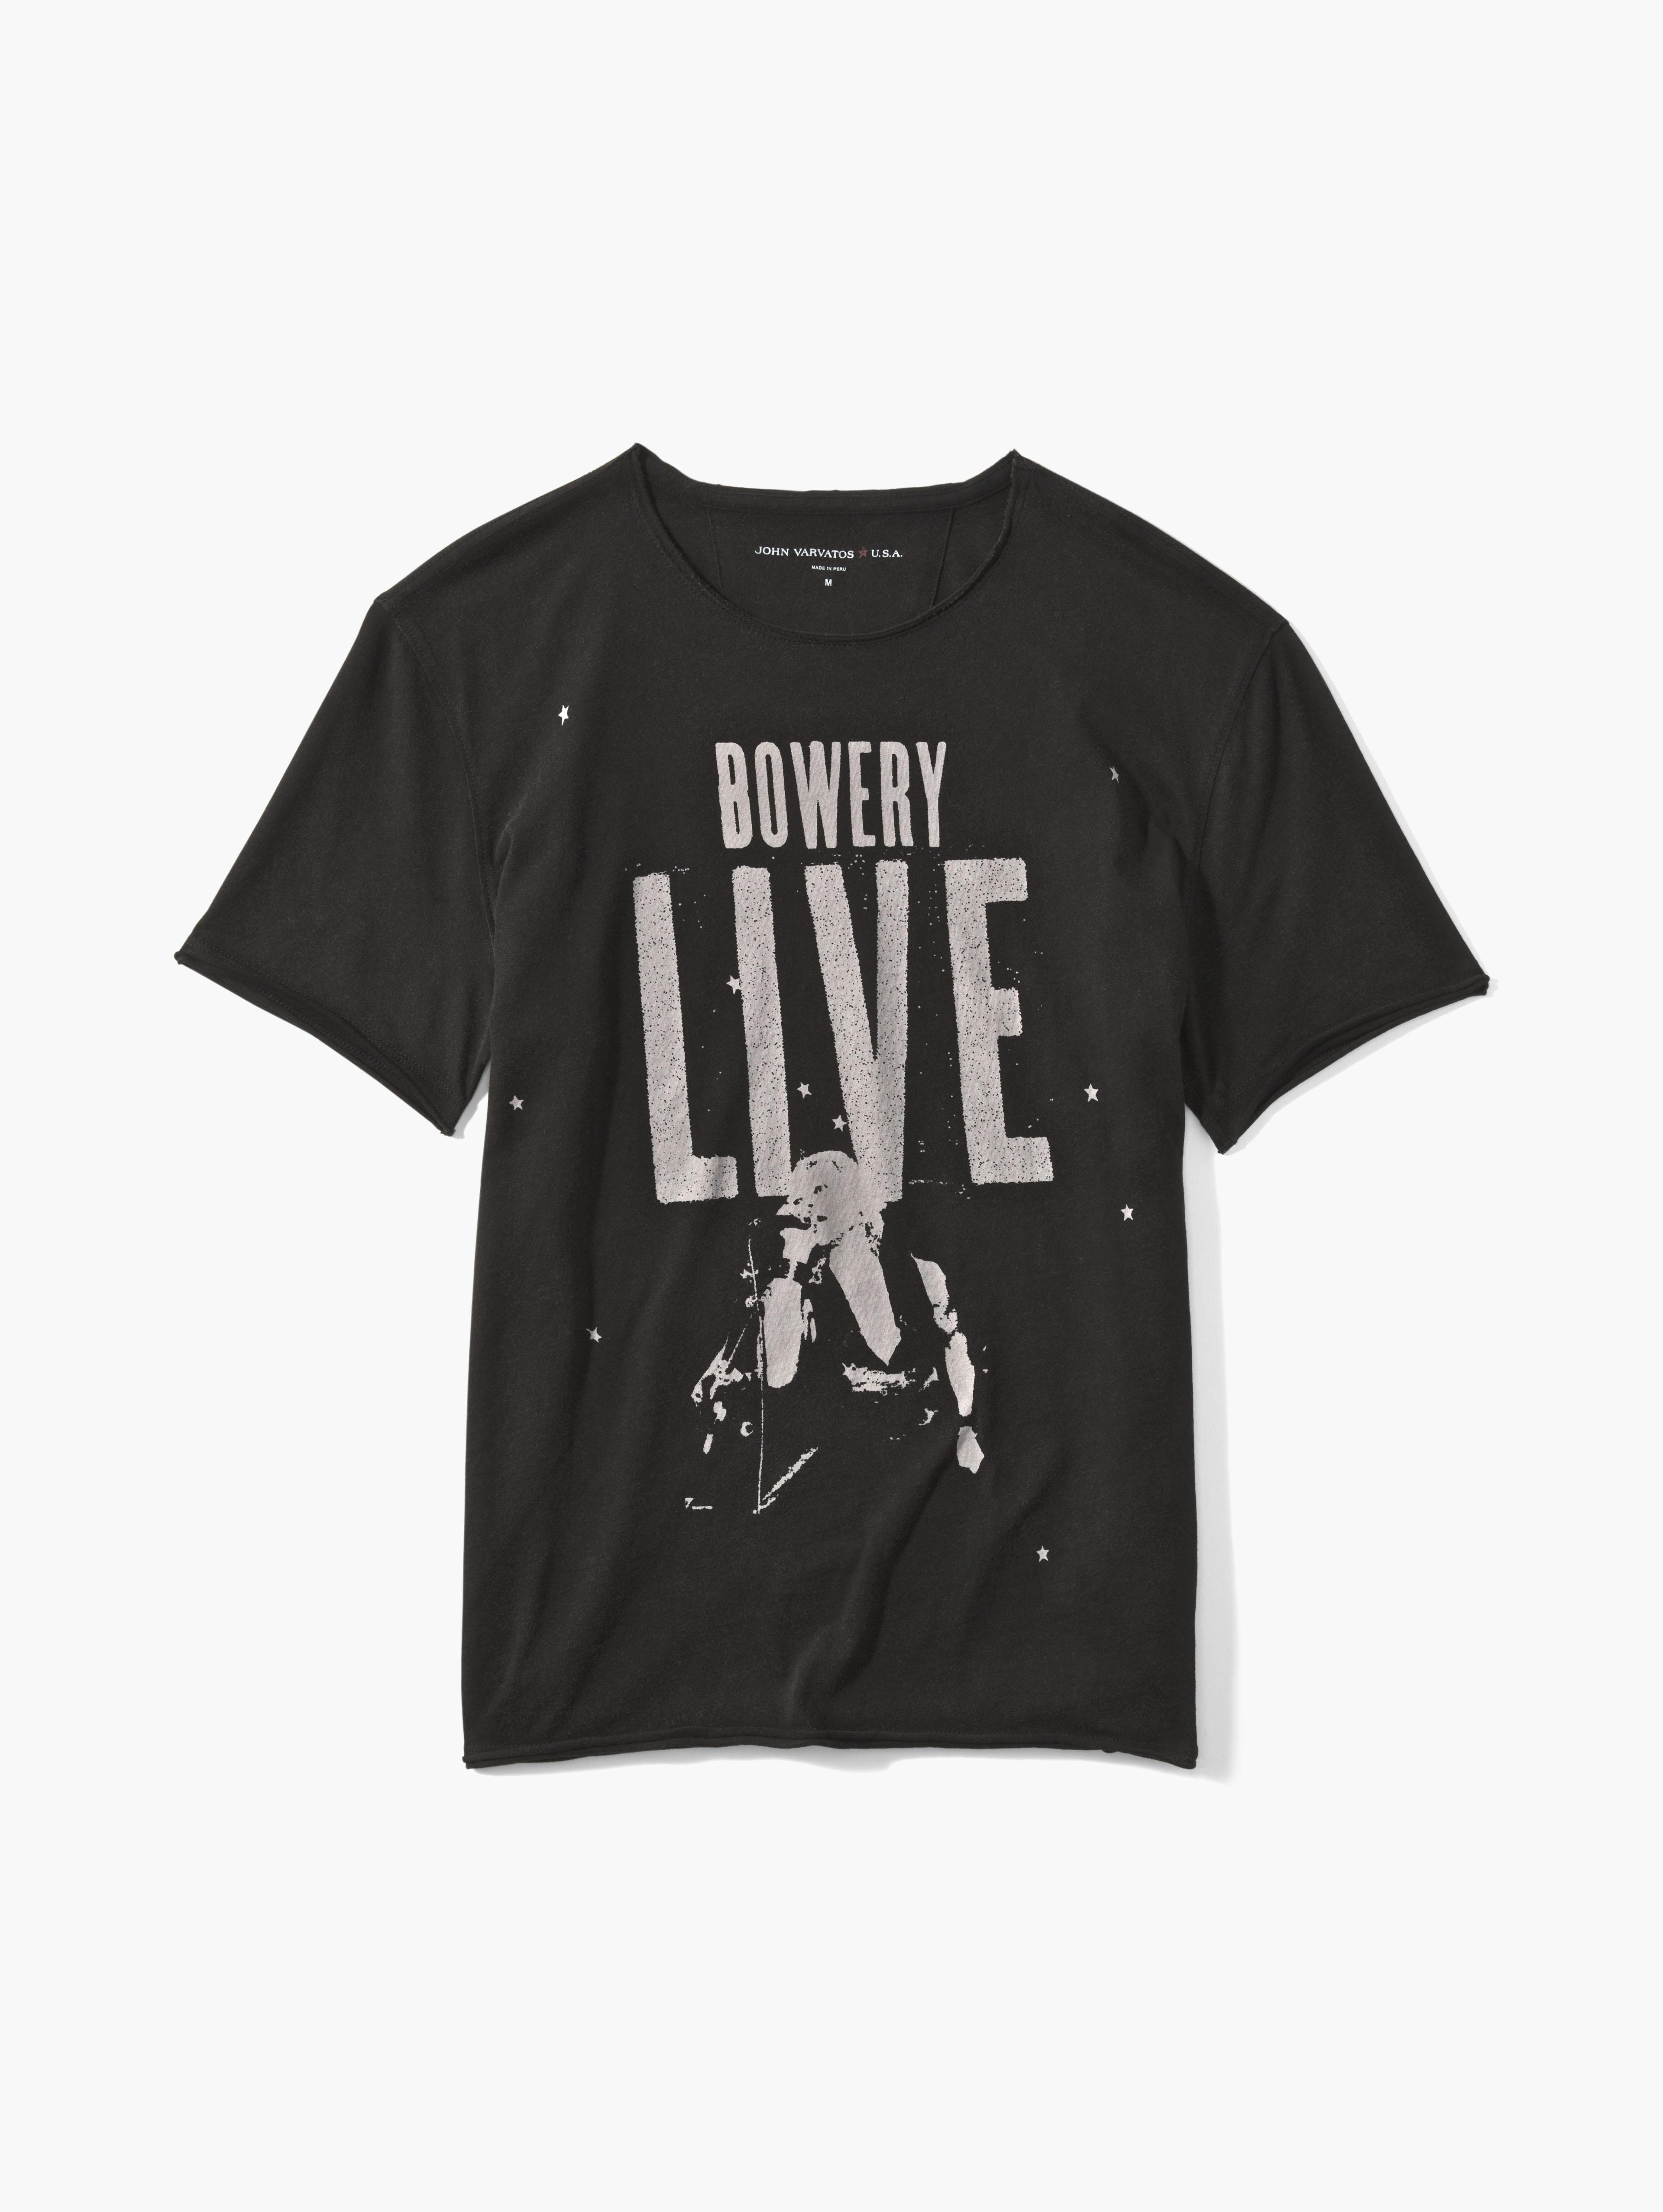 BOWERY LIVE TEE image number 1